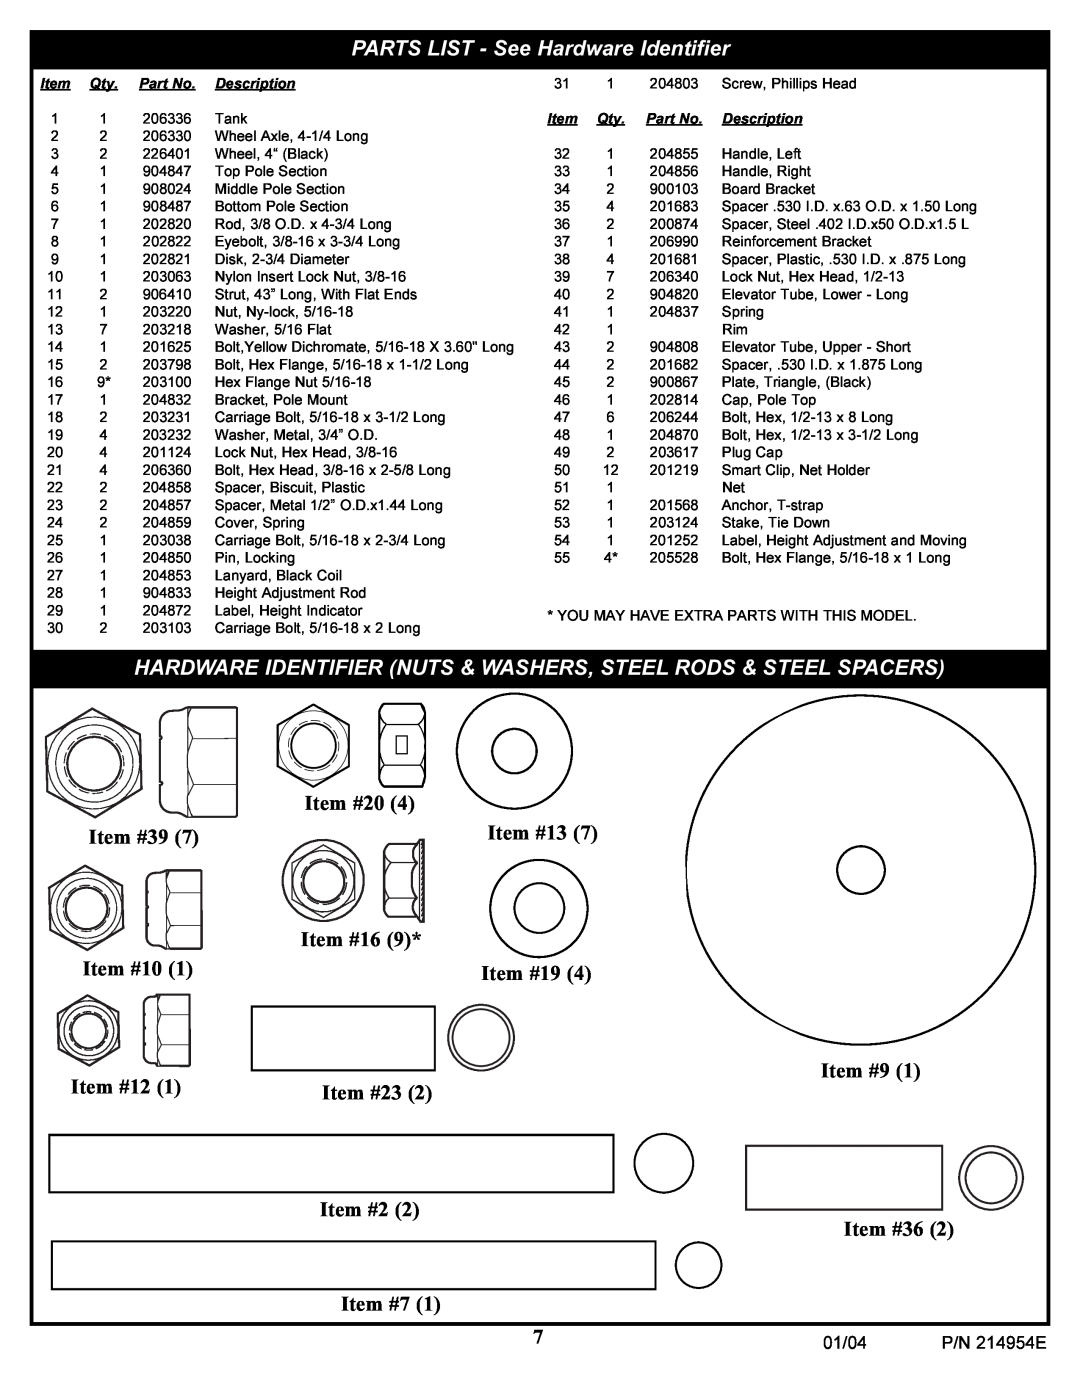 Huffy ATVUSB05 manual PARTS LIST - See Hardware Identifier, Hardware Identifier Nuts & Washers, Steel Rods & Steel Spacers 